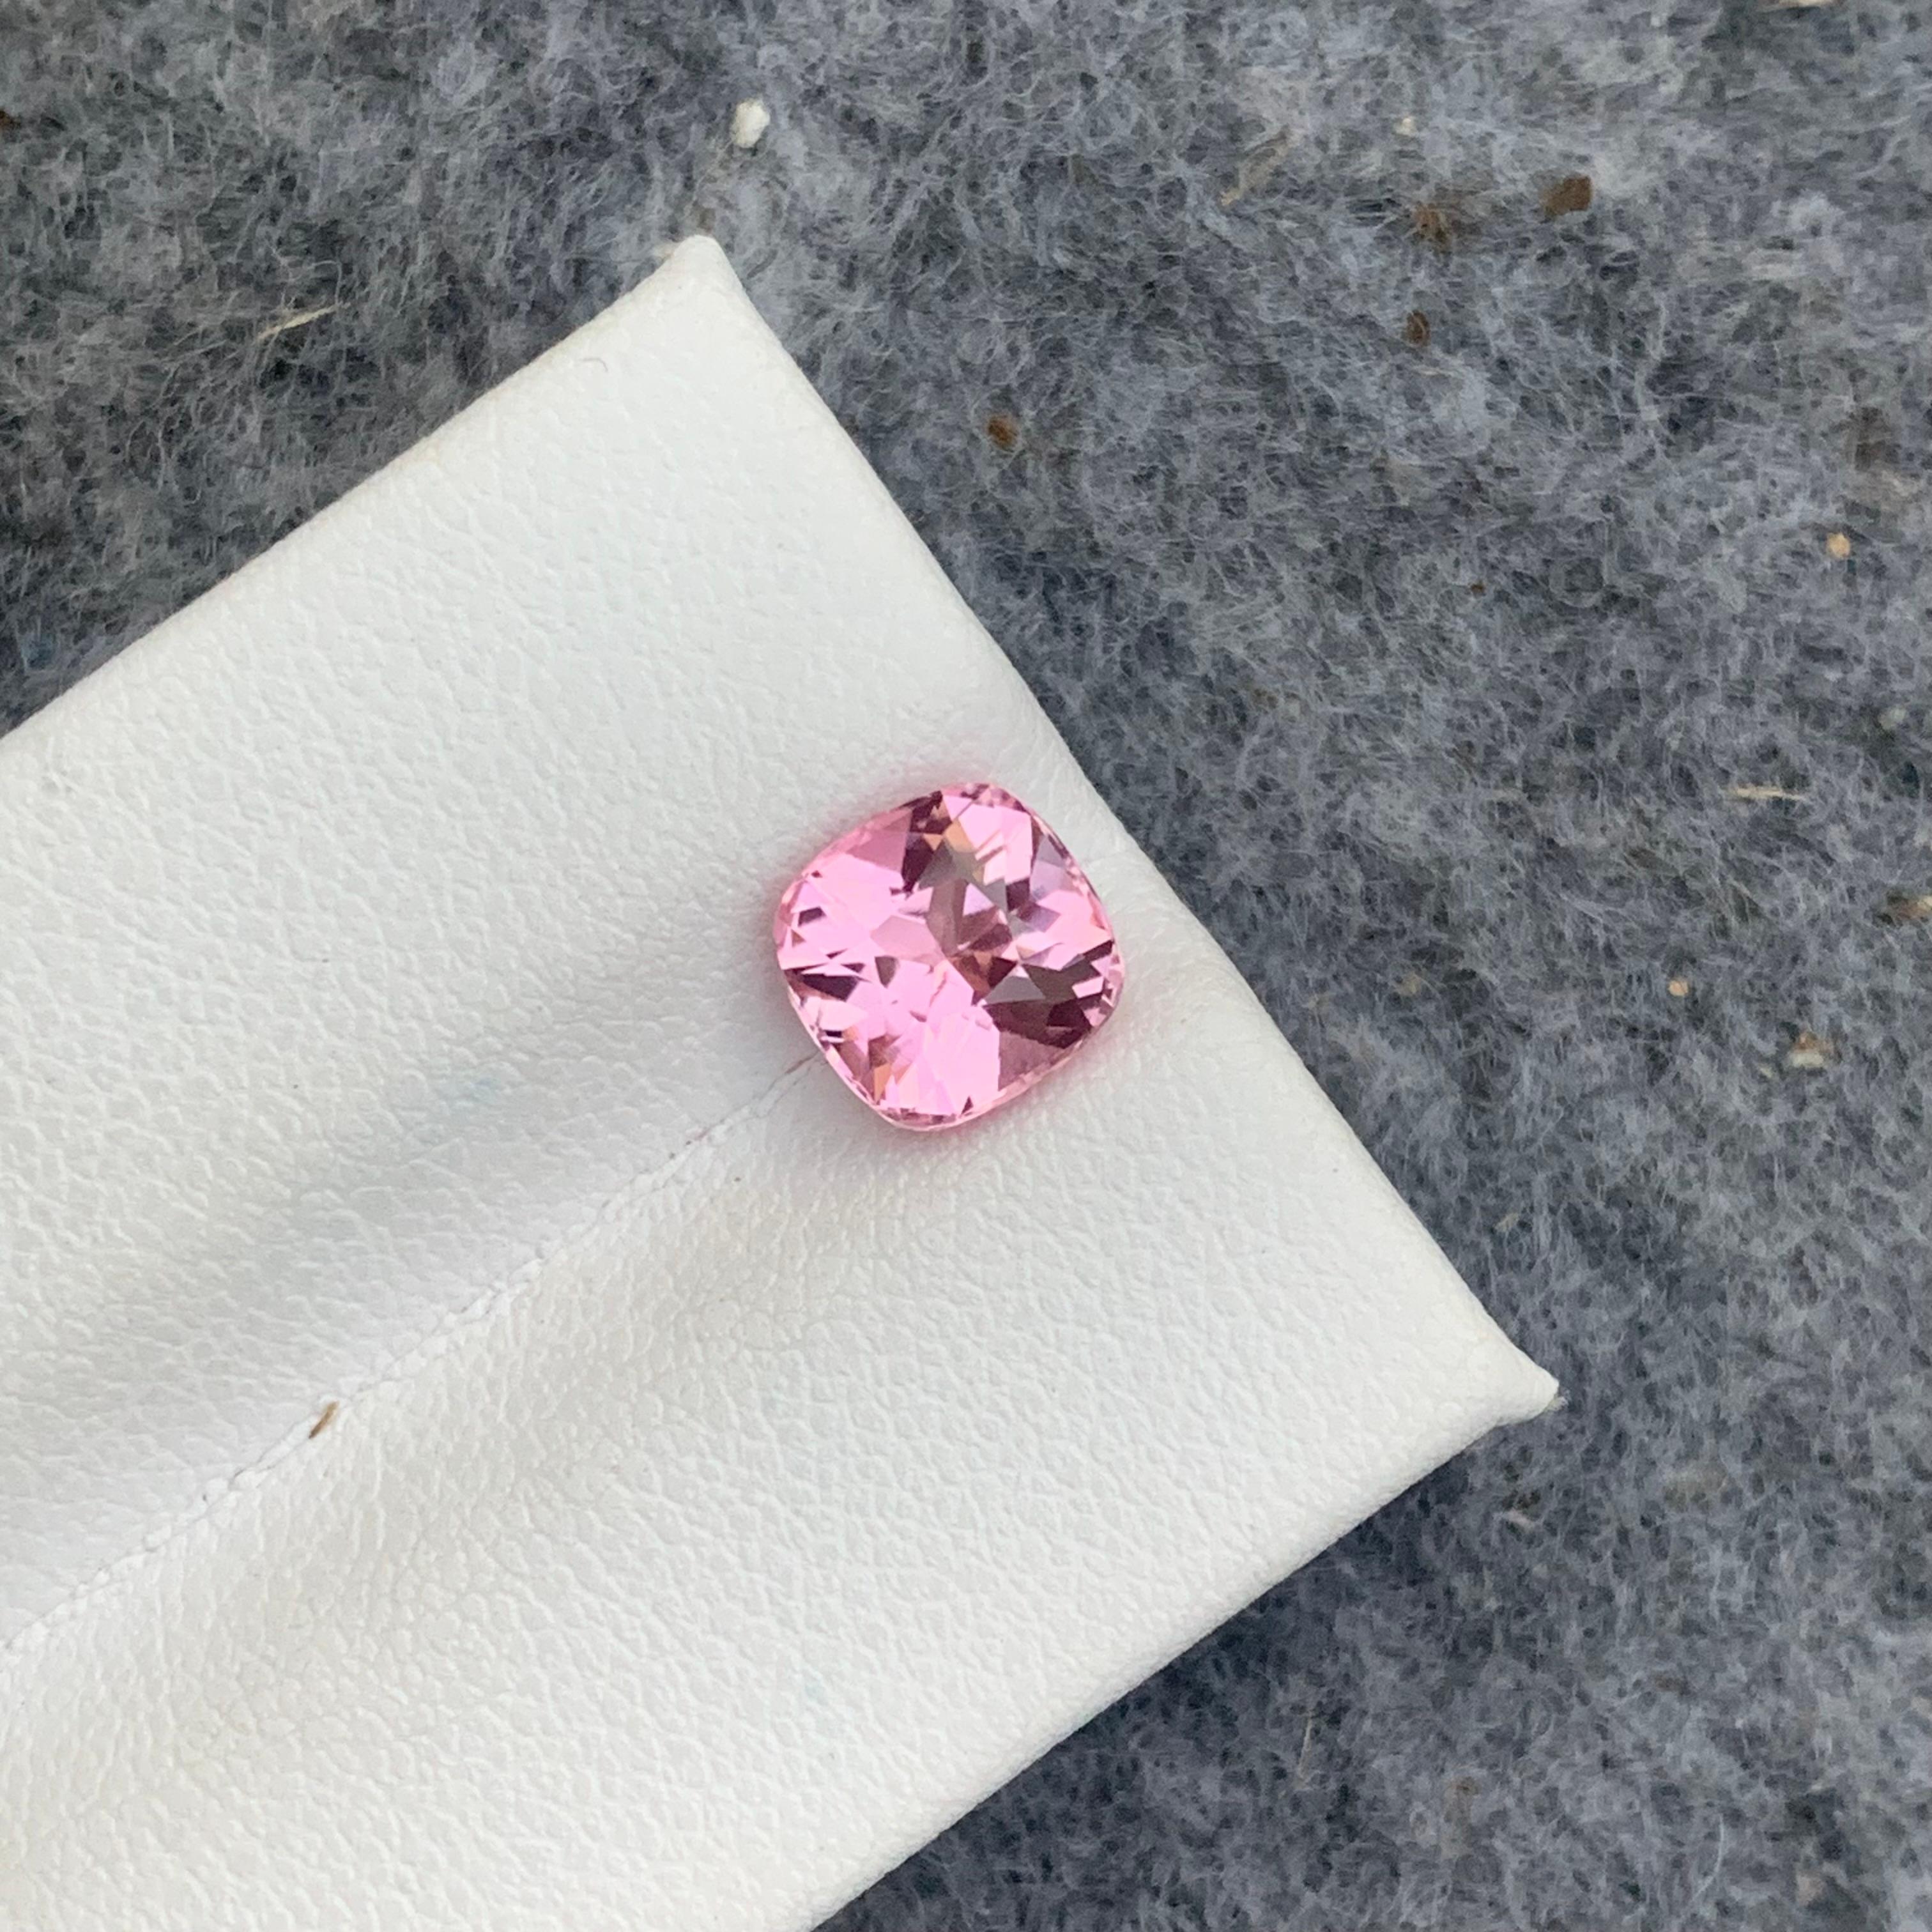 Cushion Cut Exceptional 2.0 Carat Natural Loose Baby Pink Tourmaline from Afghan Mine For Sale